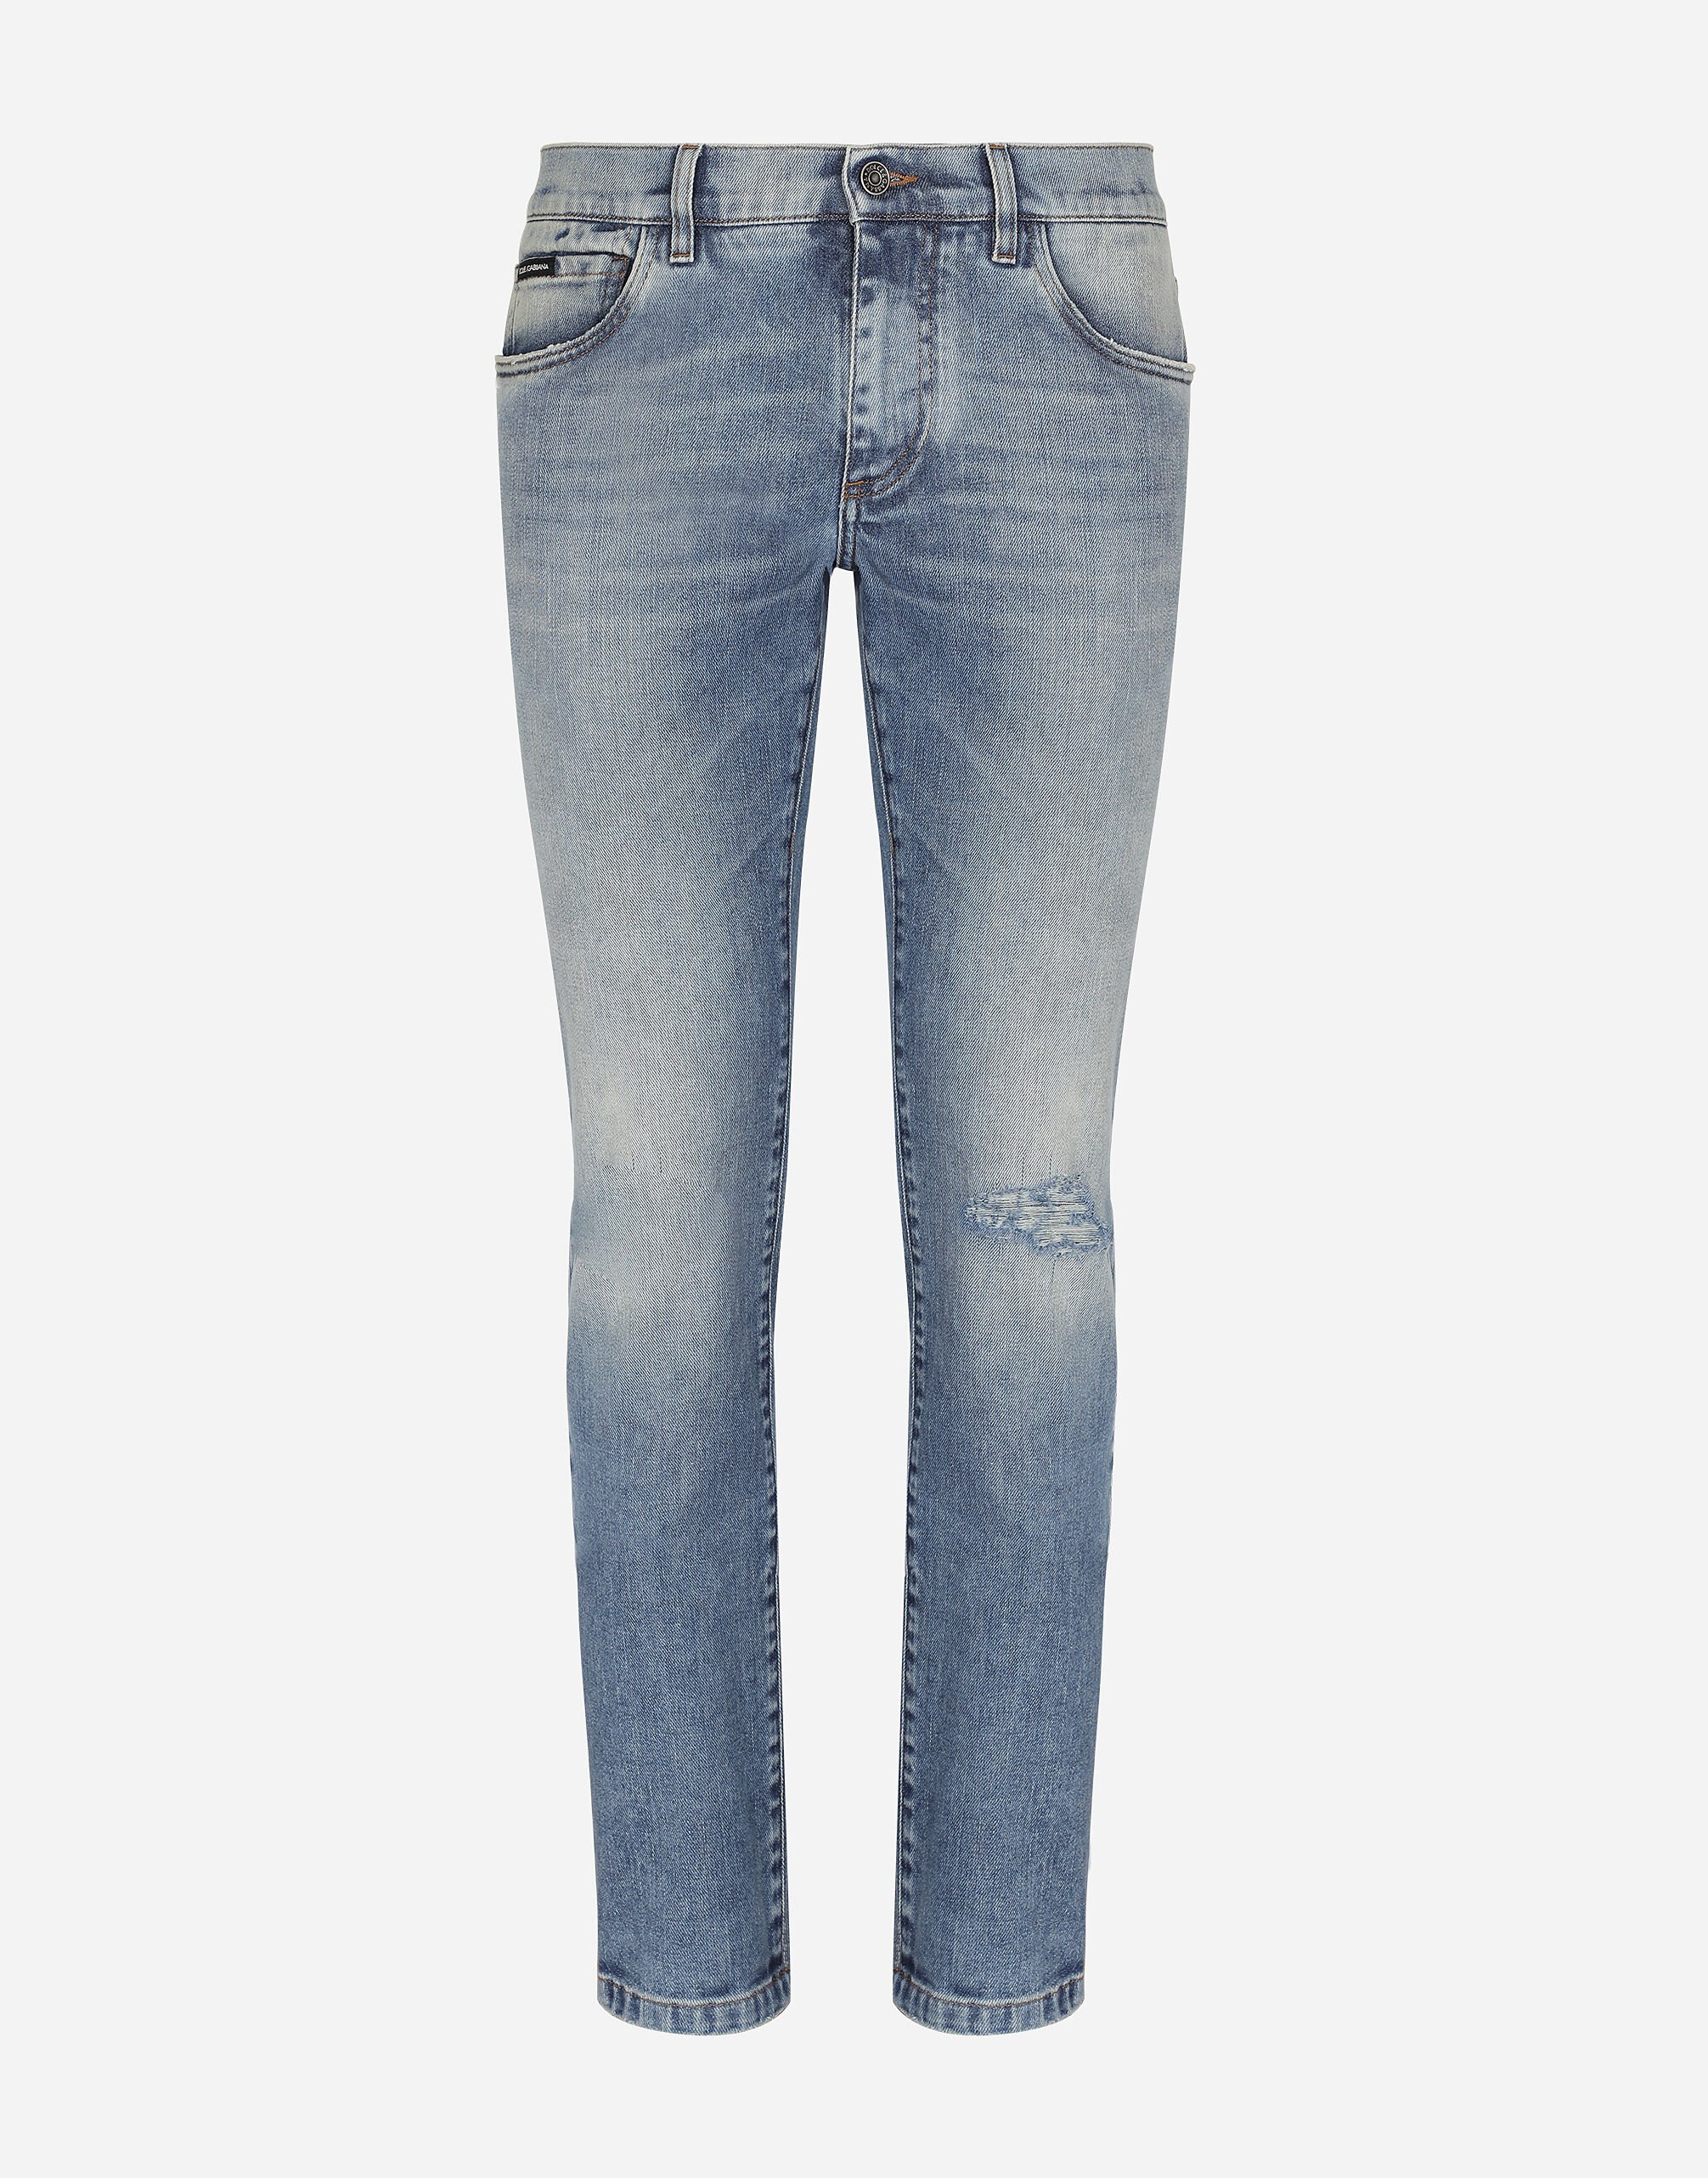 Dolce&Gabbana Light blue skinny stretch jeans with rips Multicolor GY07LDG8JT3